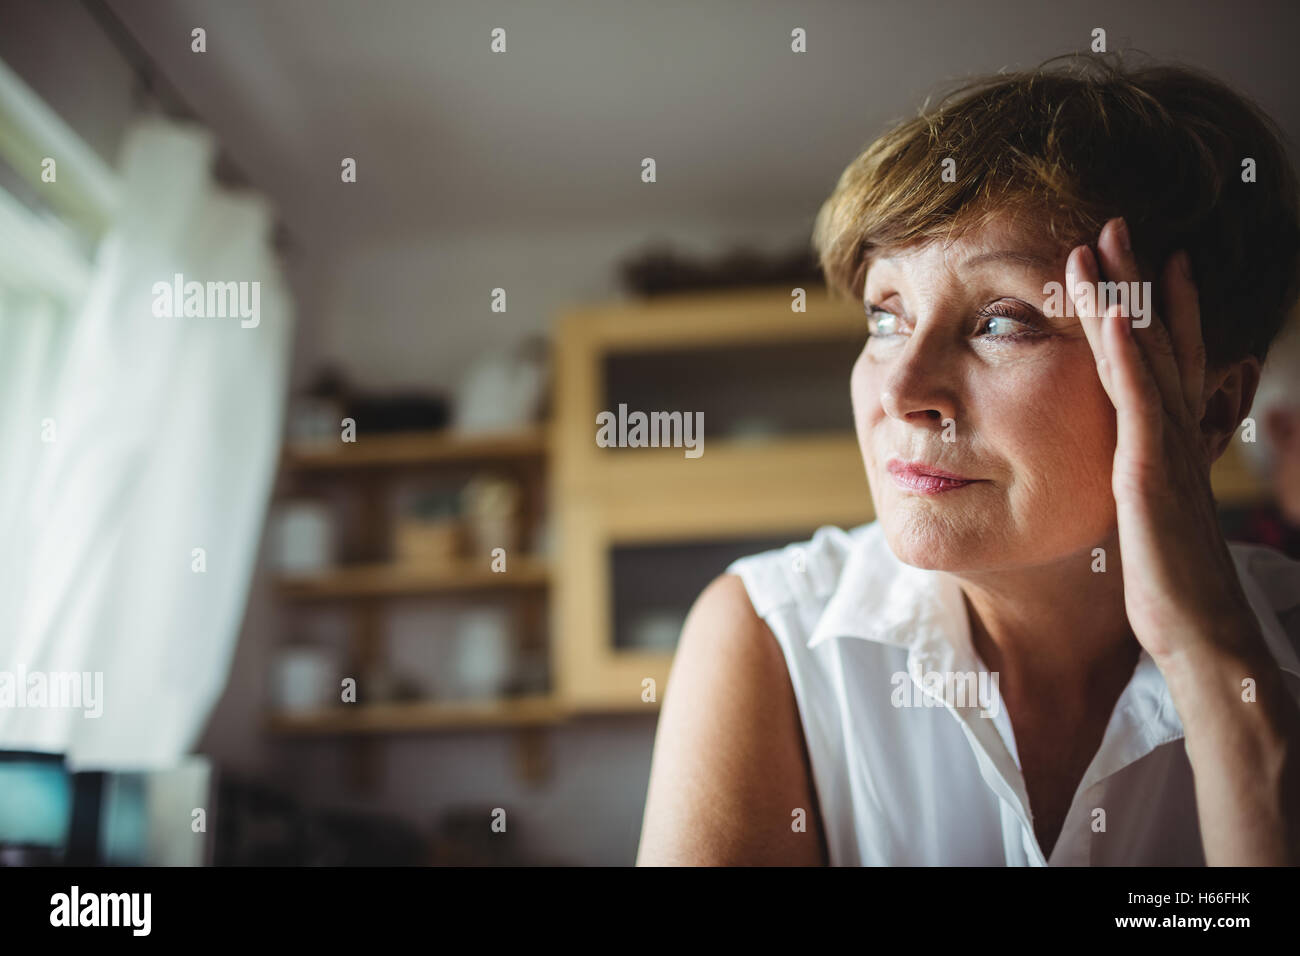 Worried senior woman with hand on forehead Stock Photo